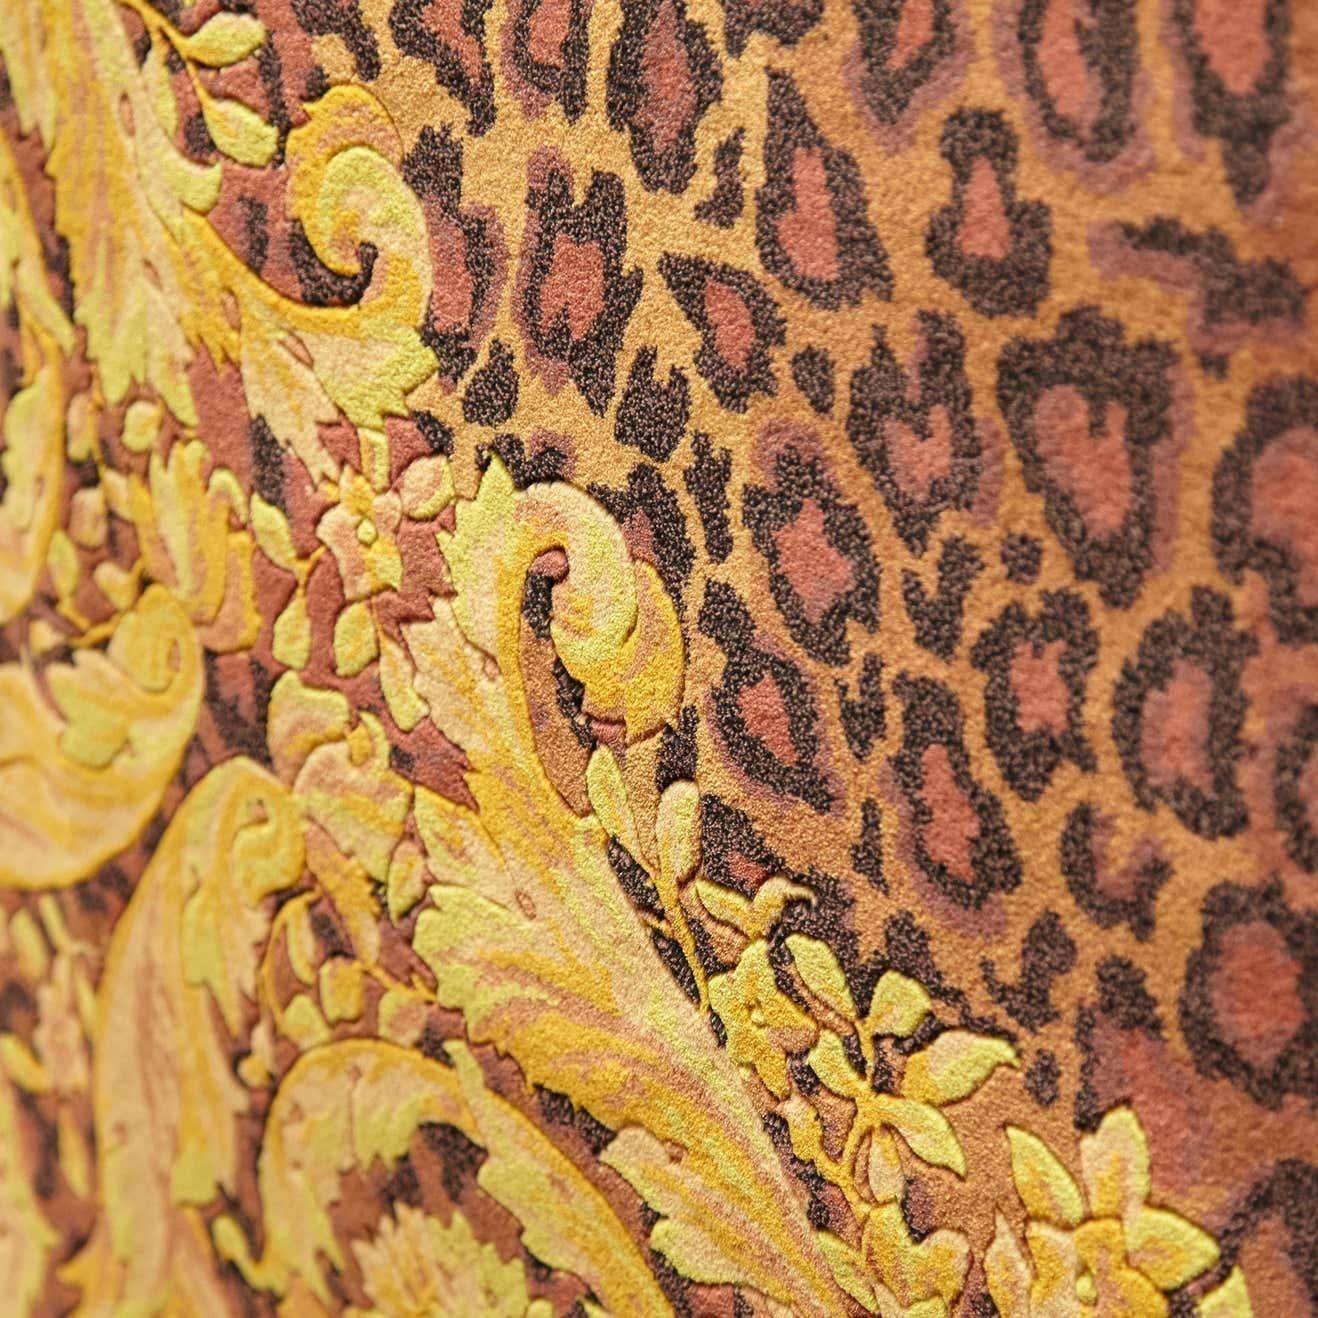 Gianni Versace Collection Rug Wild Barocco, Gold Leopard Animal Print, 1980 In Good Condition For Sale In Barcelona, Barcelona